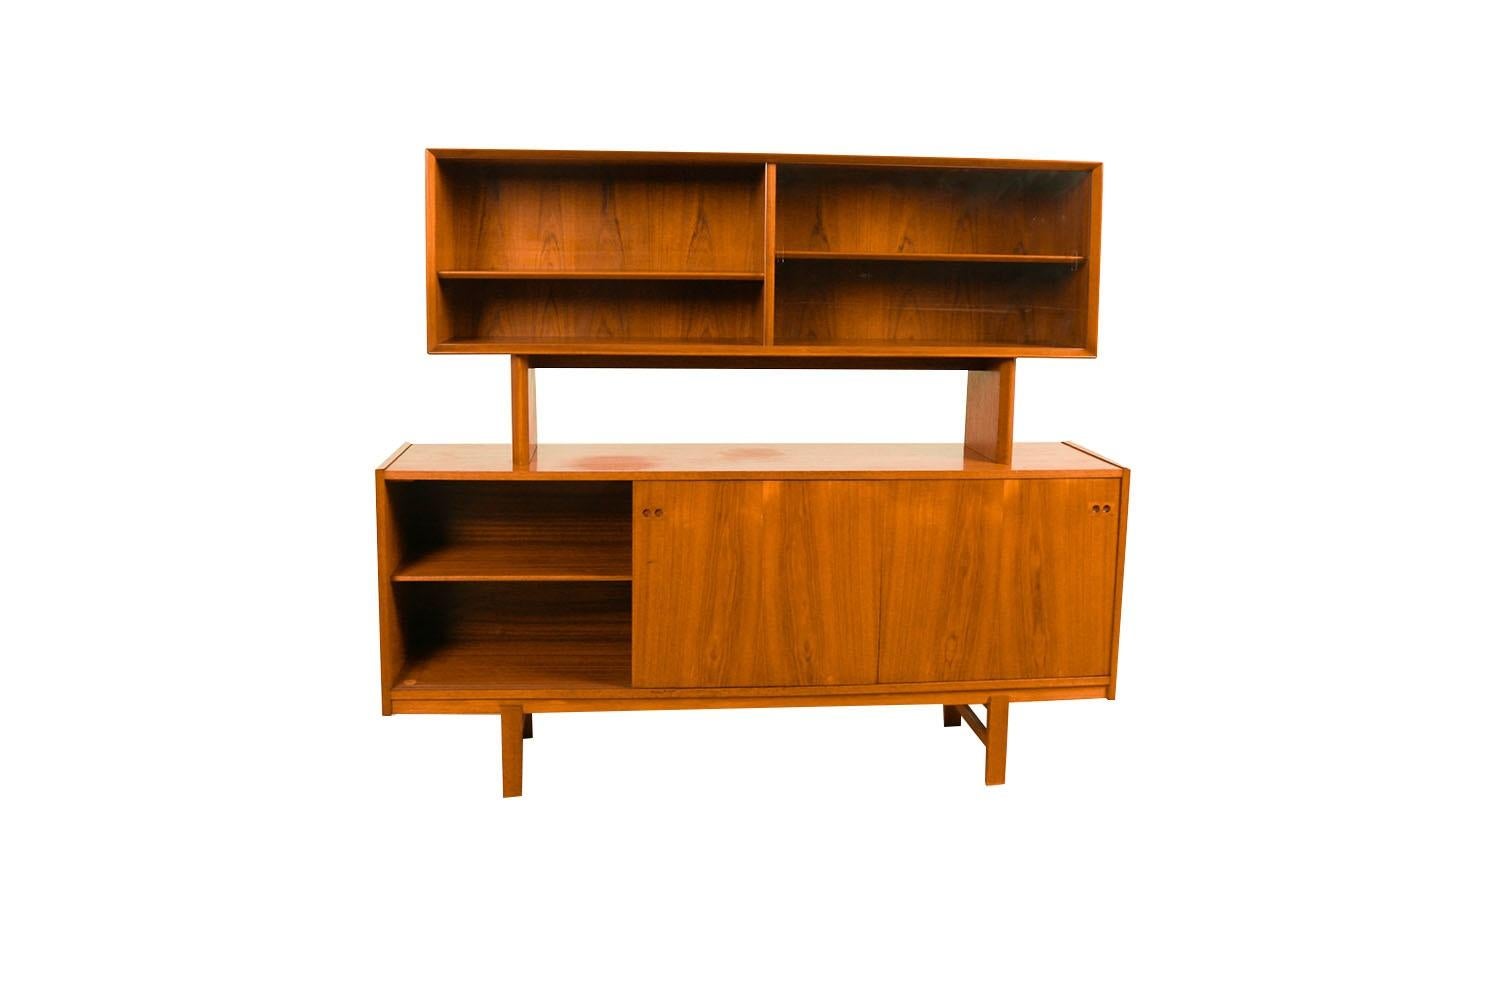 Remarkable, teak, stunning sliding glass doors, two-piece hutch credenza made in Denmark.  This Danish Modern teak credenza /hutch is beautifully embellished with bands of teak running perpendicular to the main surface. Precisely crafted in